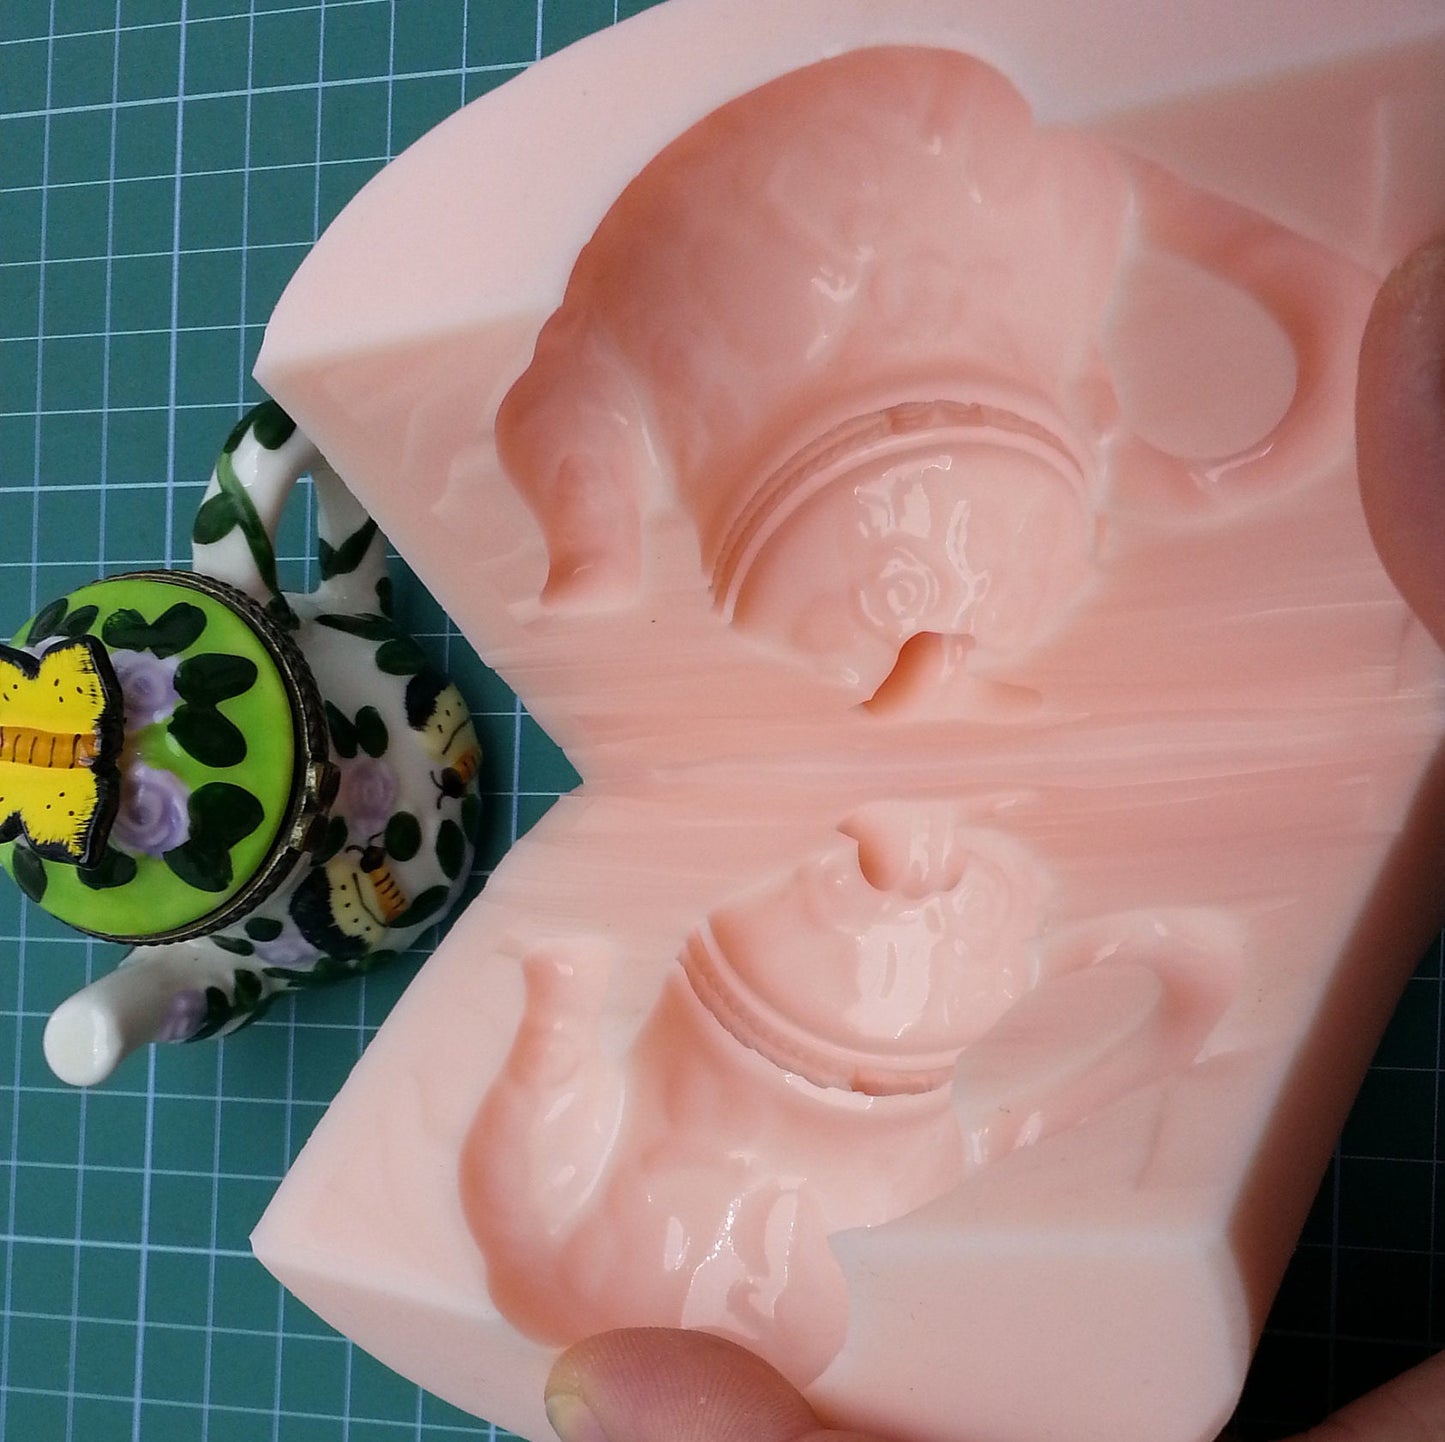 Porcelain teapot silicone mold for soap making